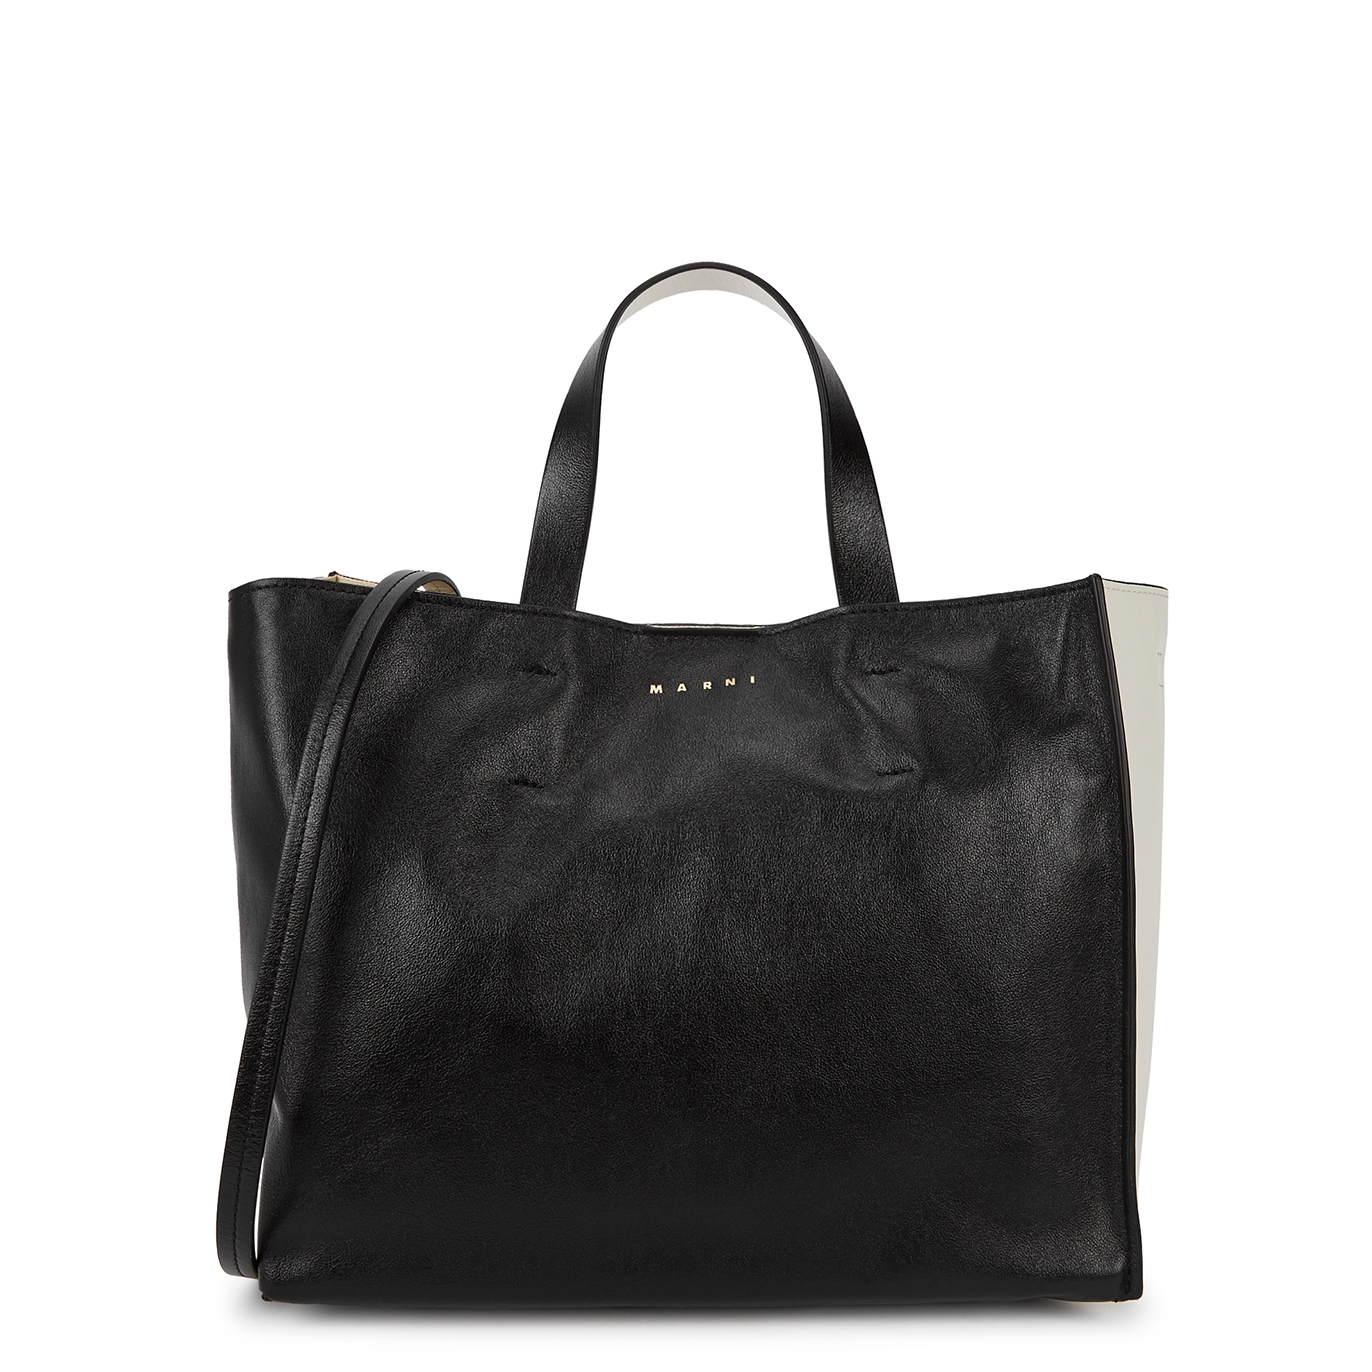 Marni Museo Soft Black And White Leather Tote